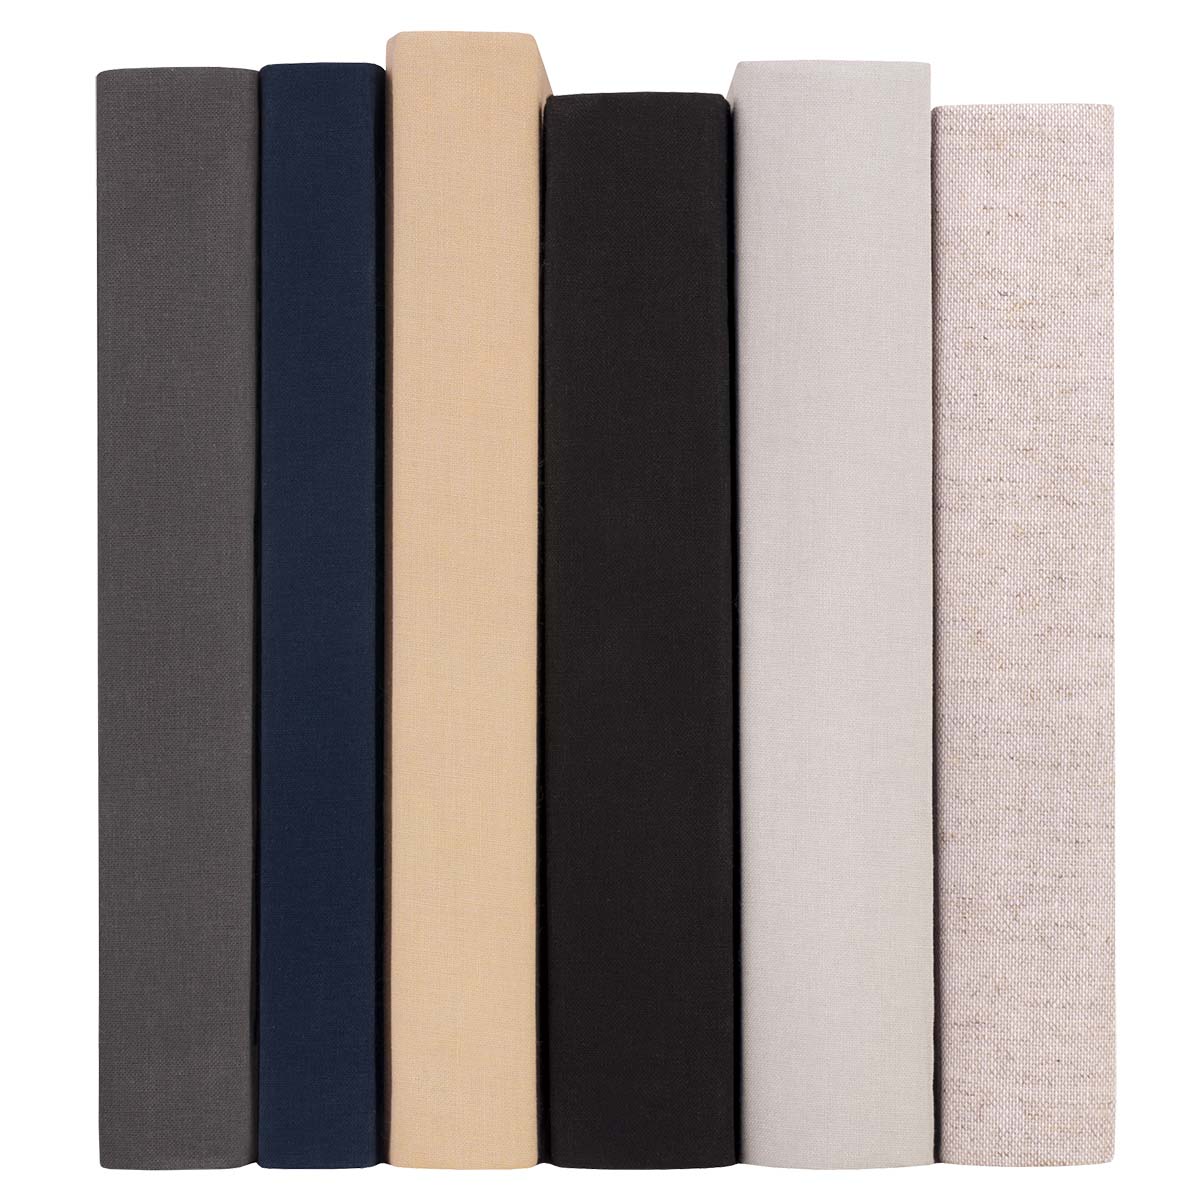 Add a touch of subtle sophistication to any shelf. Juniper Custom's fabric-wrapped books effortlessly add warmth, texture, and a purposefully uniform look to any space. They are hand-wrapped in premium bookbinding fabric and available in various classic, neutral shades.